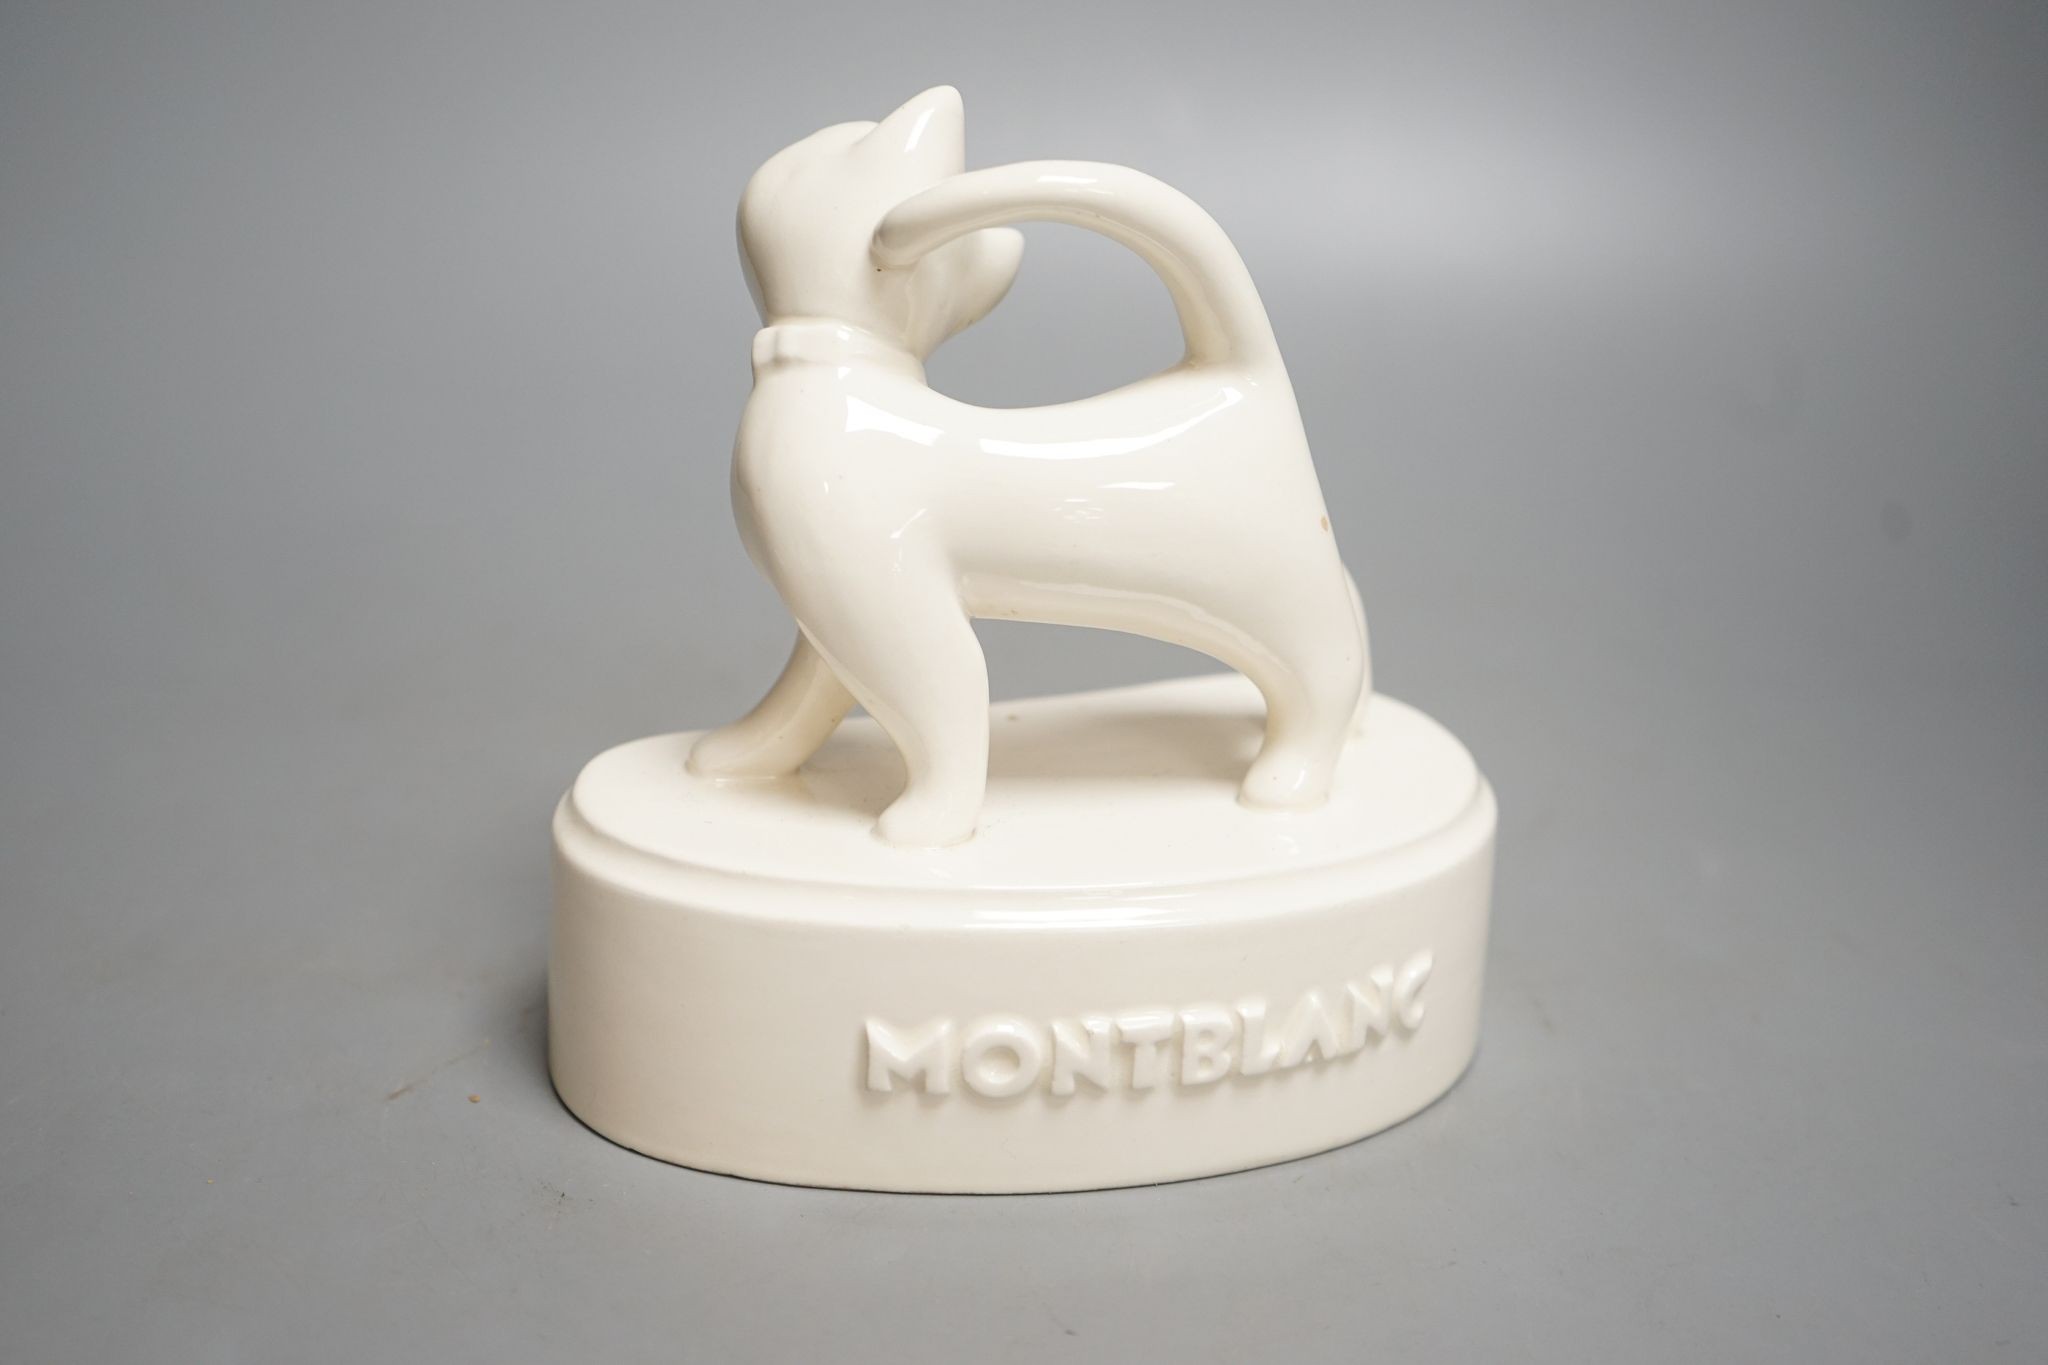 A rare Montblanc advertising display pottery 